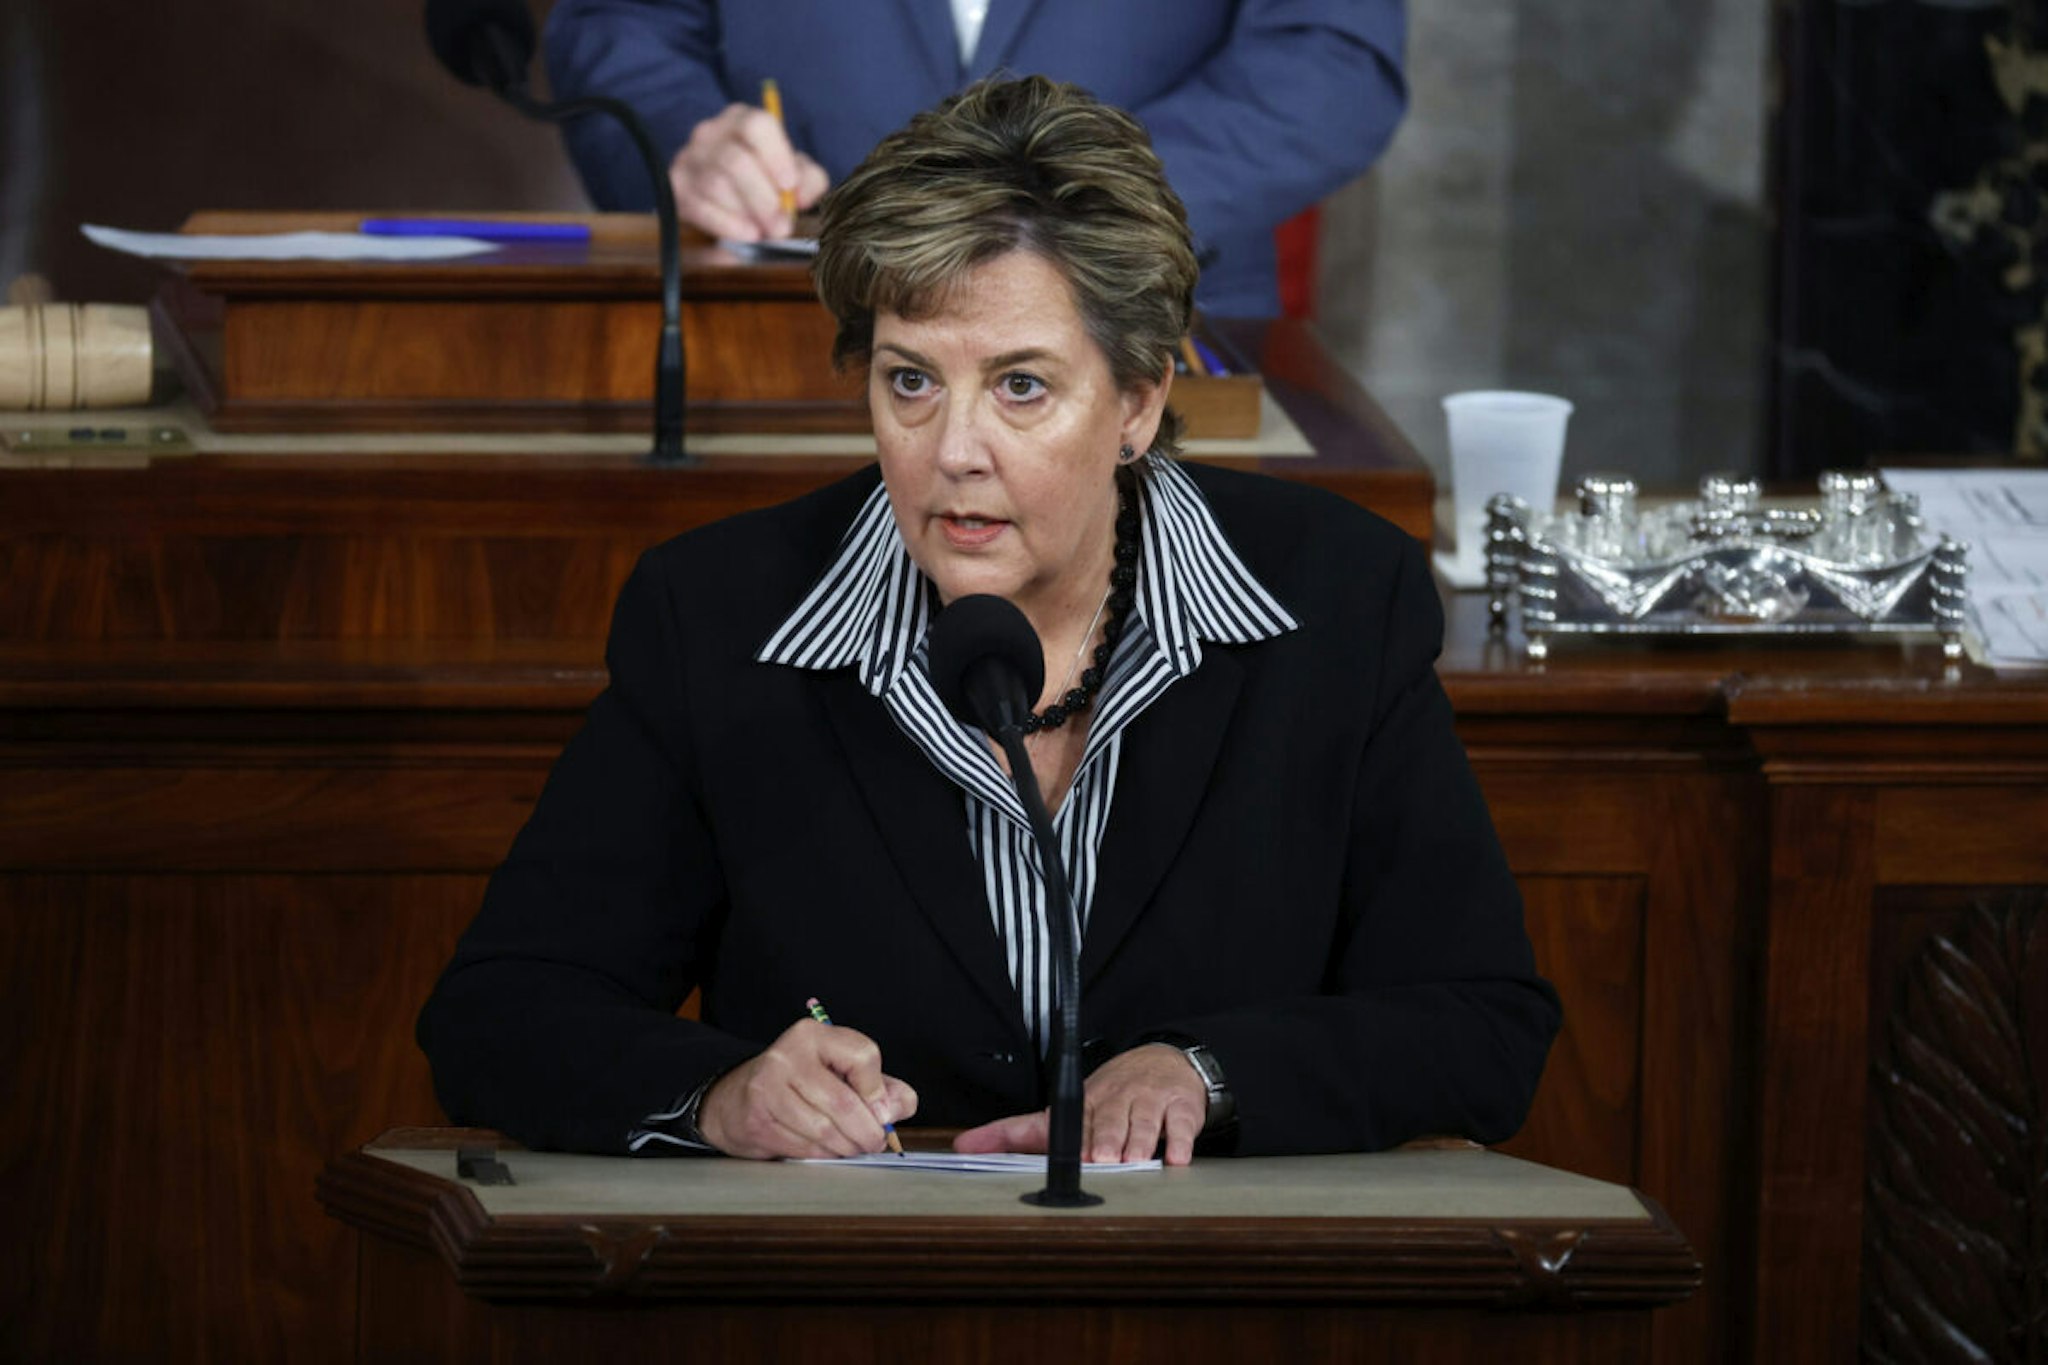 House Reading Clerk Susan Cole presides over a vote in the House of Representatives for a new Speaker of the House at the U.S. Capitol on October 25, 2023 in Washington, DC.